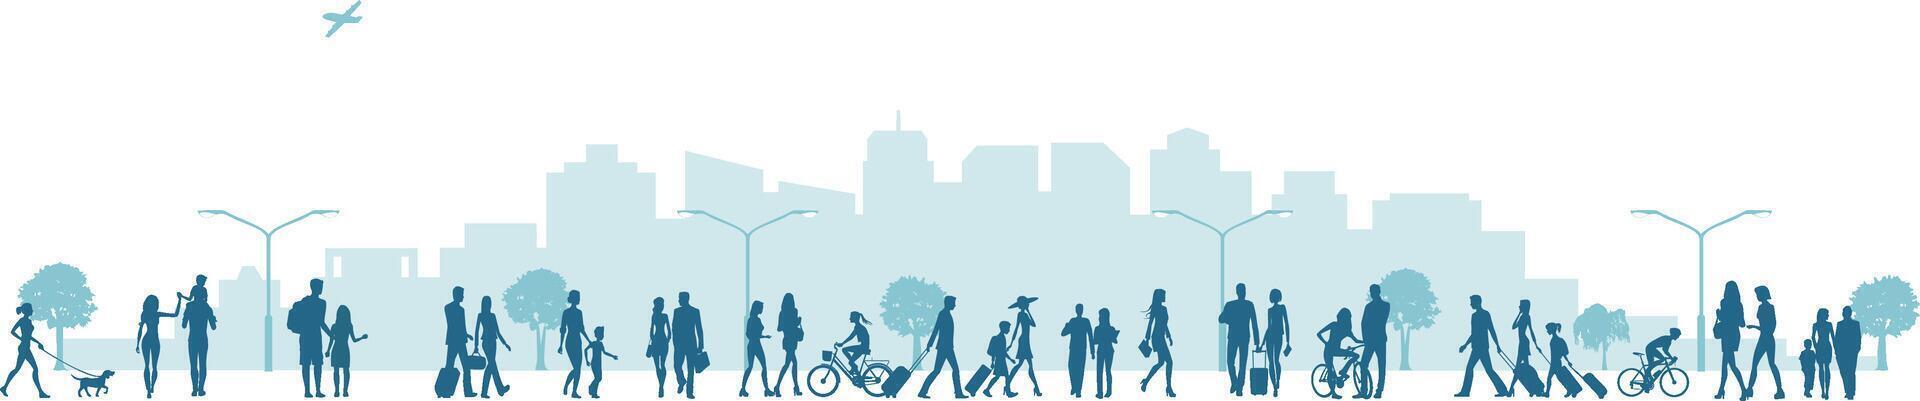 City and Crowd of People Vector Illustration